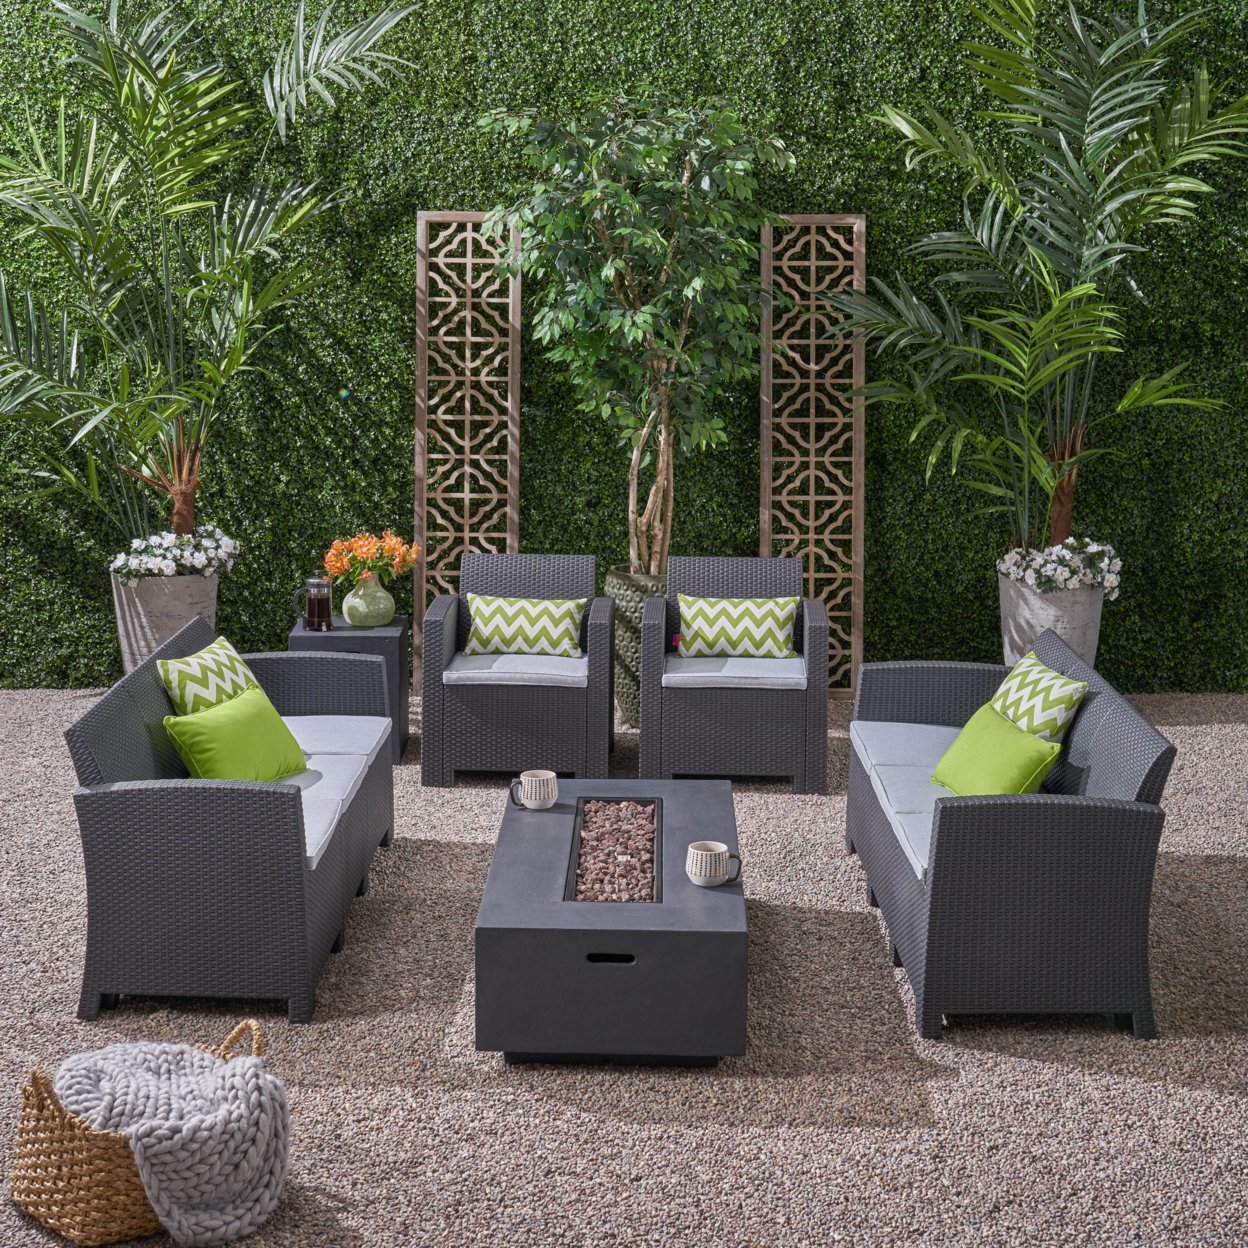 Denise Outdoor Wicker Chat Set With Fire Pit And Tank Holder - Charcoal + Light Gray + Dark Gray